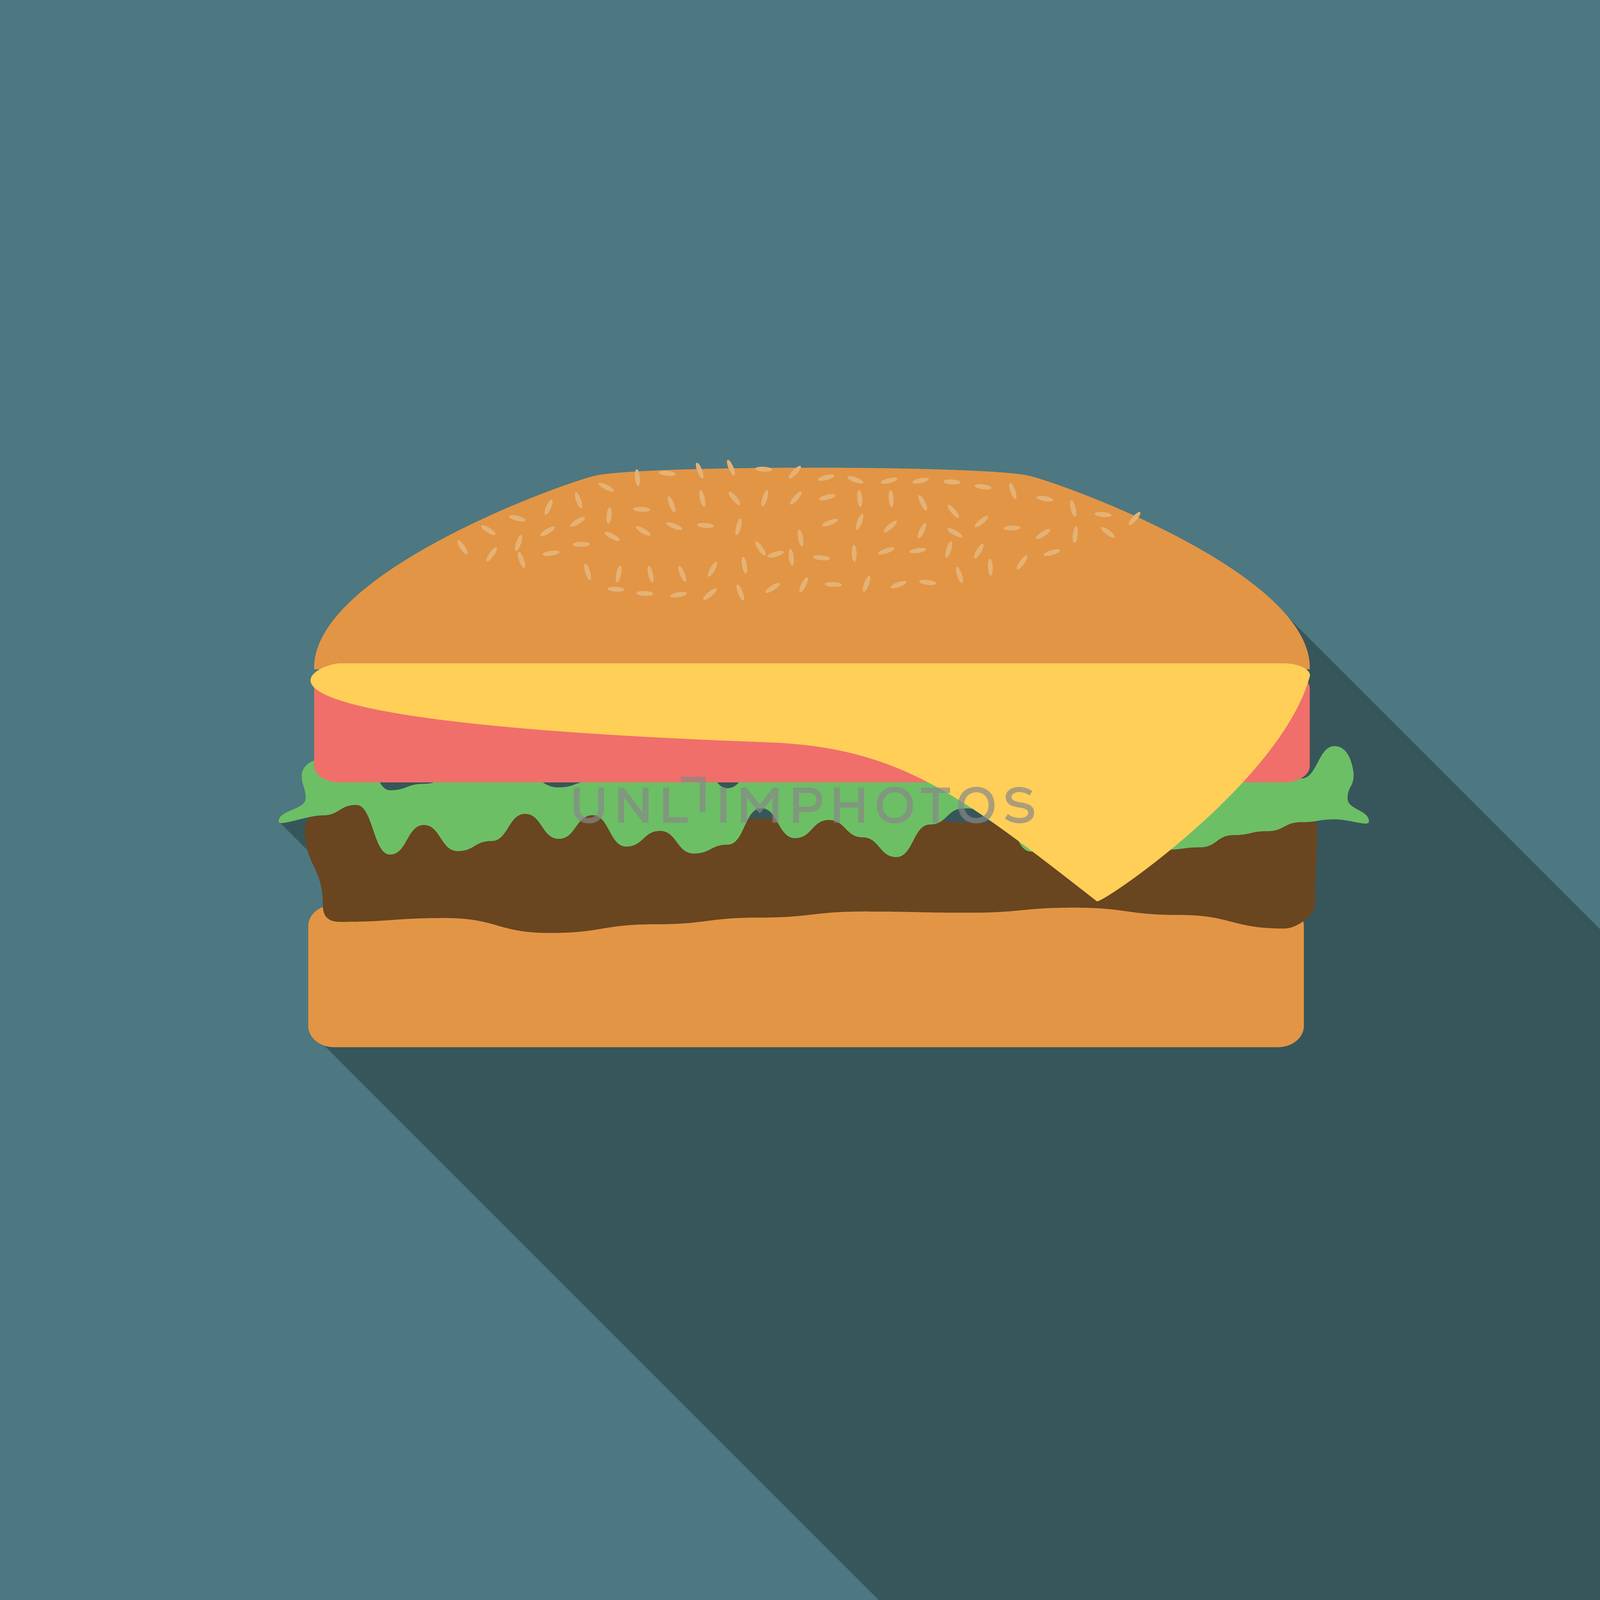 Flat design vector burger icon with long shadowFlat design vector vinyl record icon with long shadow by Lemon_workshop